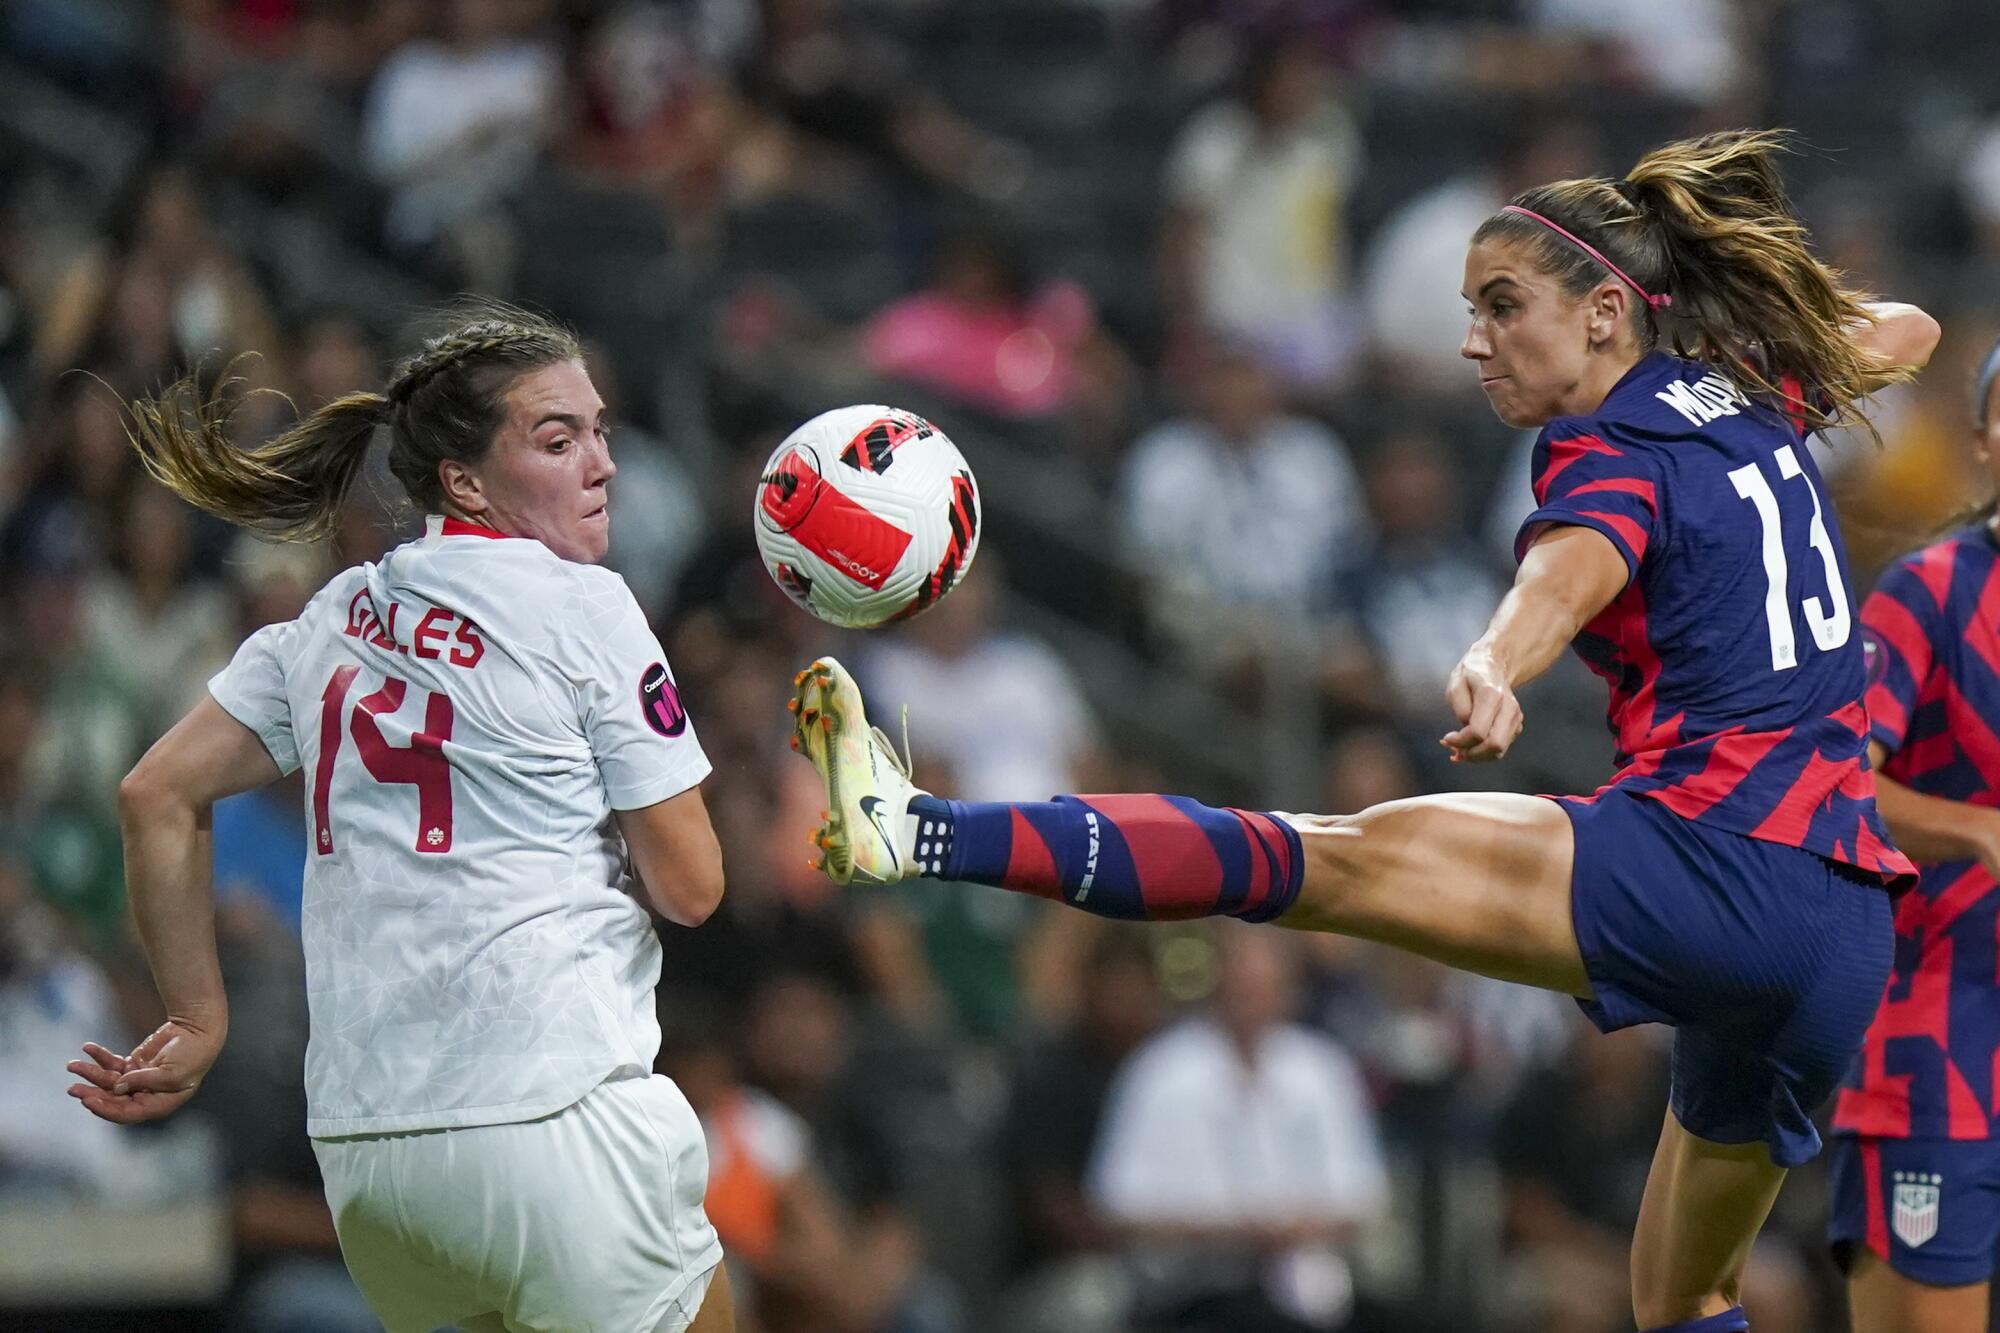 Alex Morgan scores first goal in more than year in Tottenham appearance